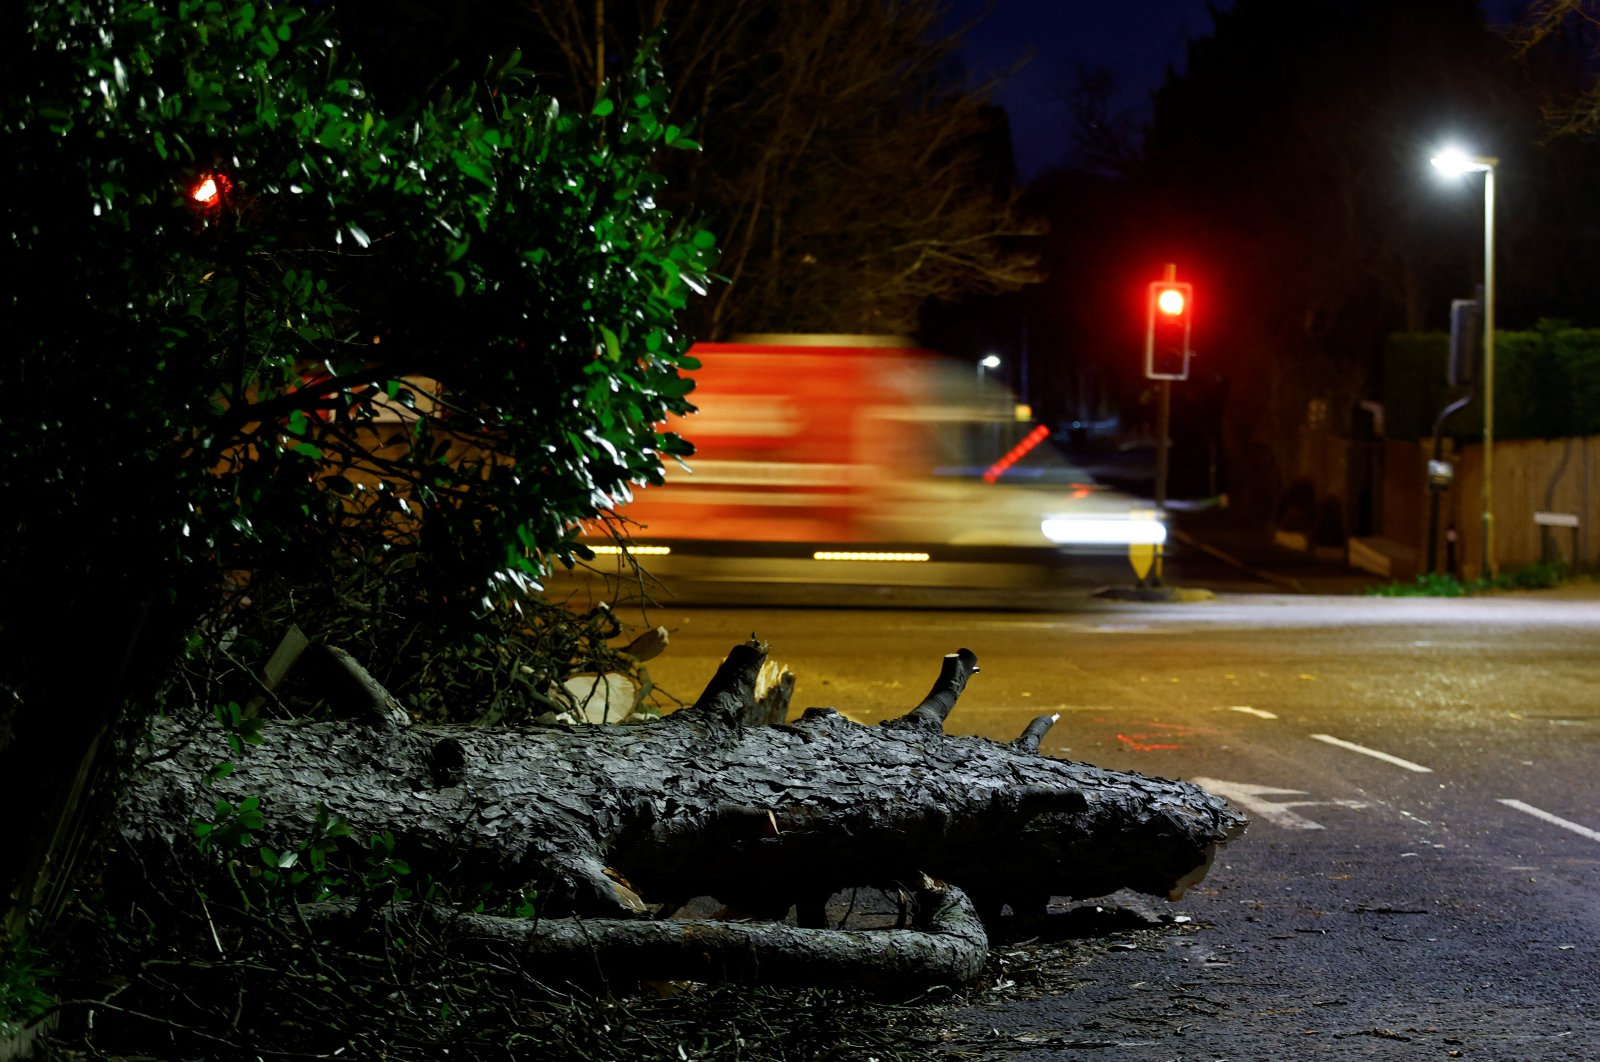 A fallen tree lies across a road after Storm Eunice, in Leatherhead, Britain, Feb. 18, 2022. (Reuters Photo)